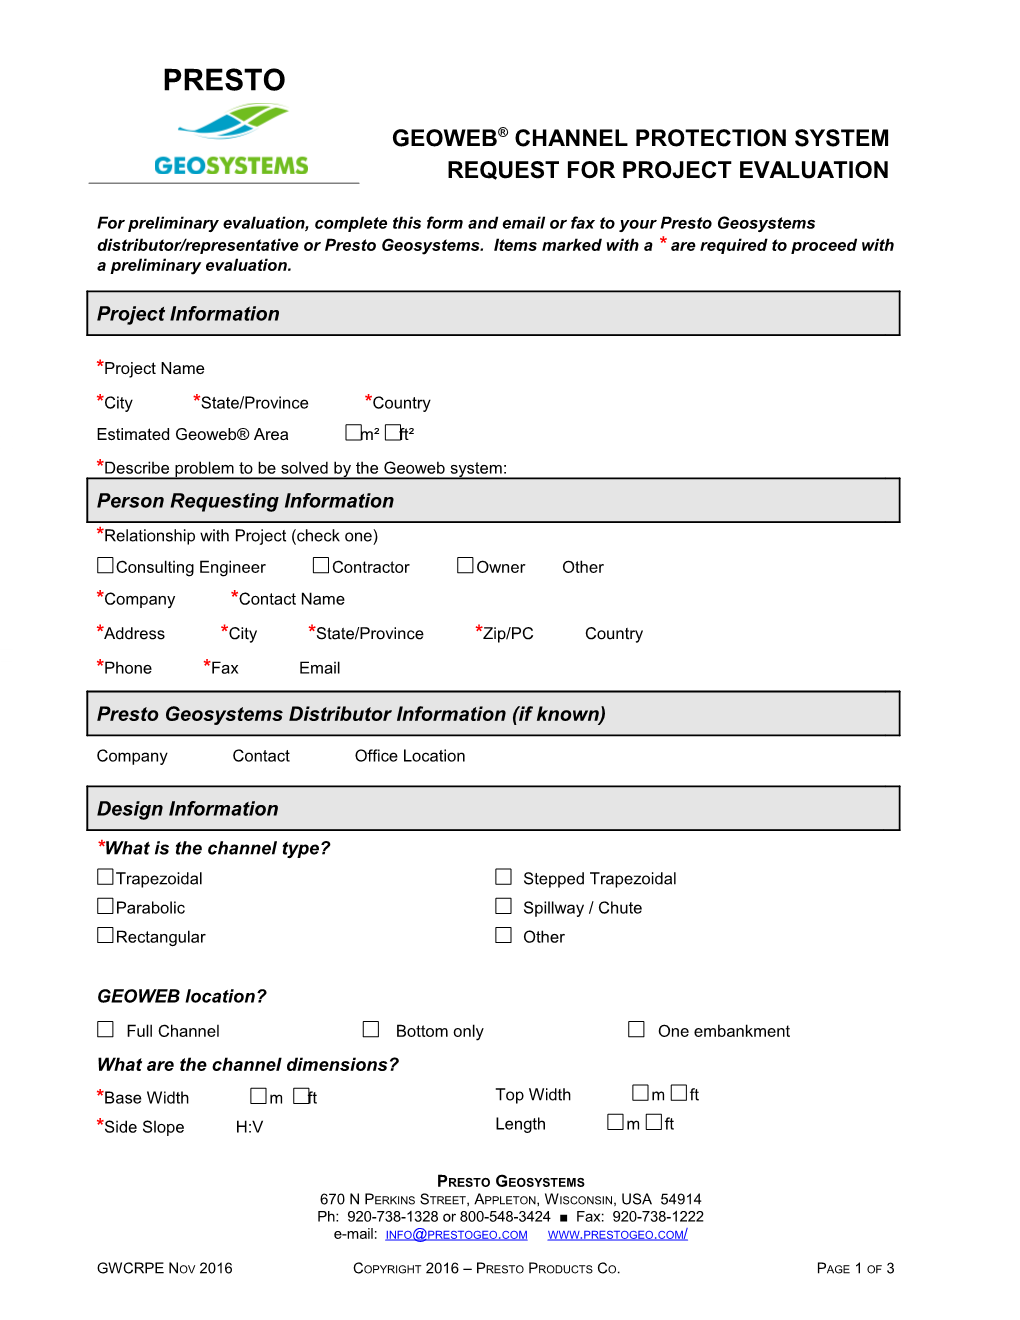 The Geoweb Channel Protection System Request for Project Evaluation